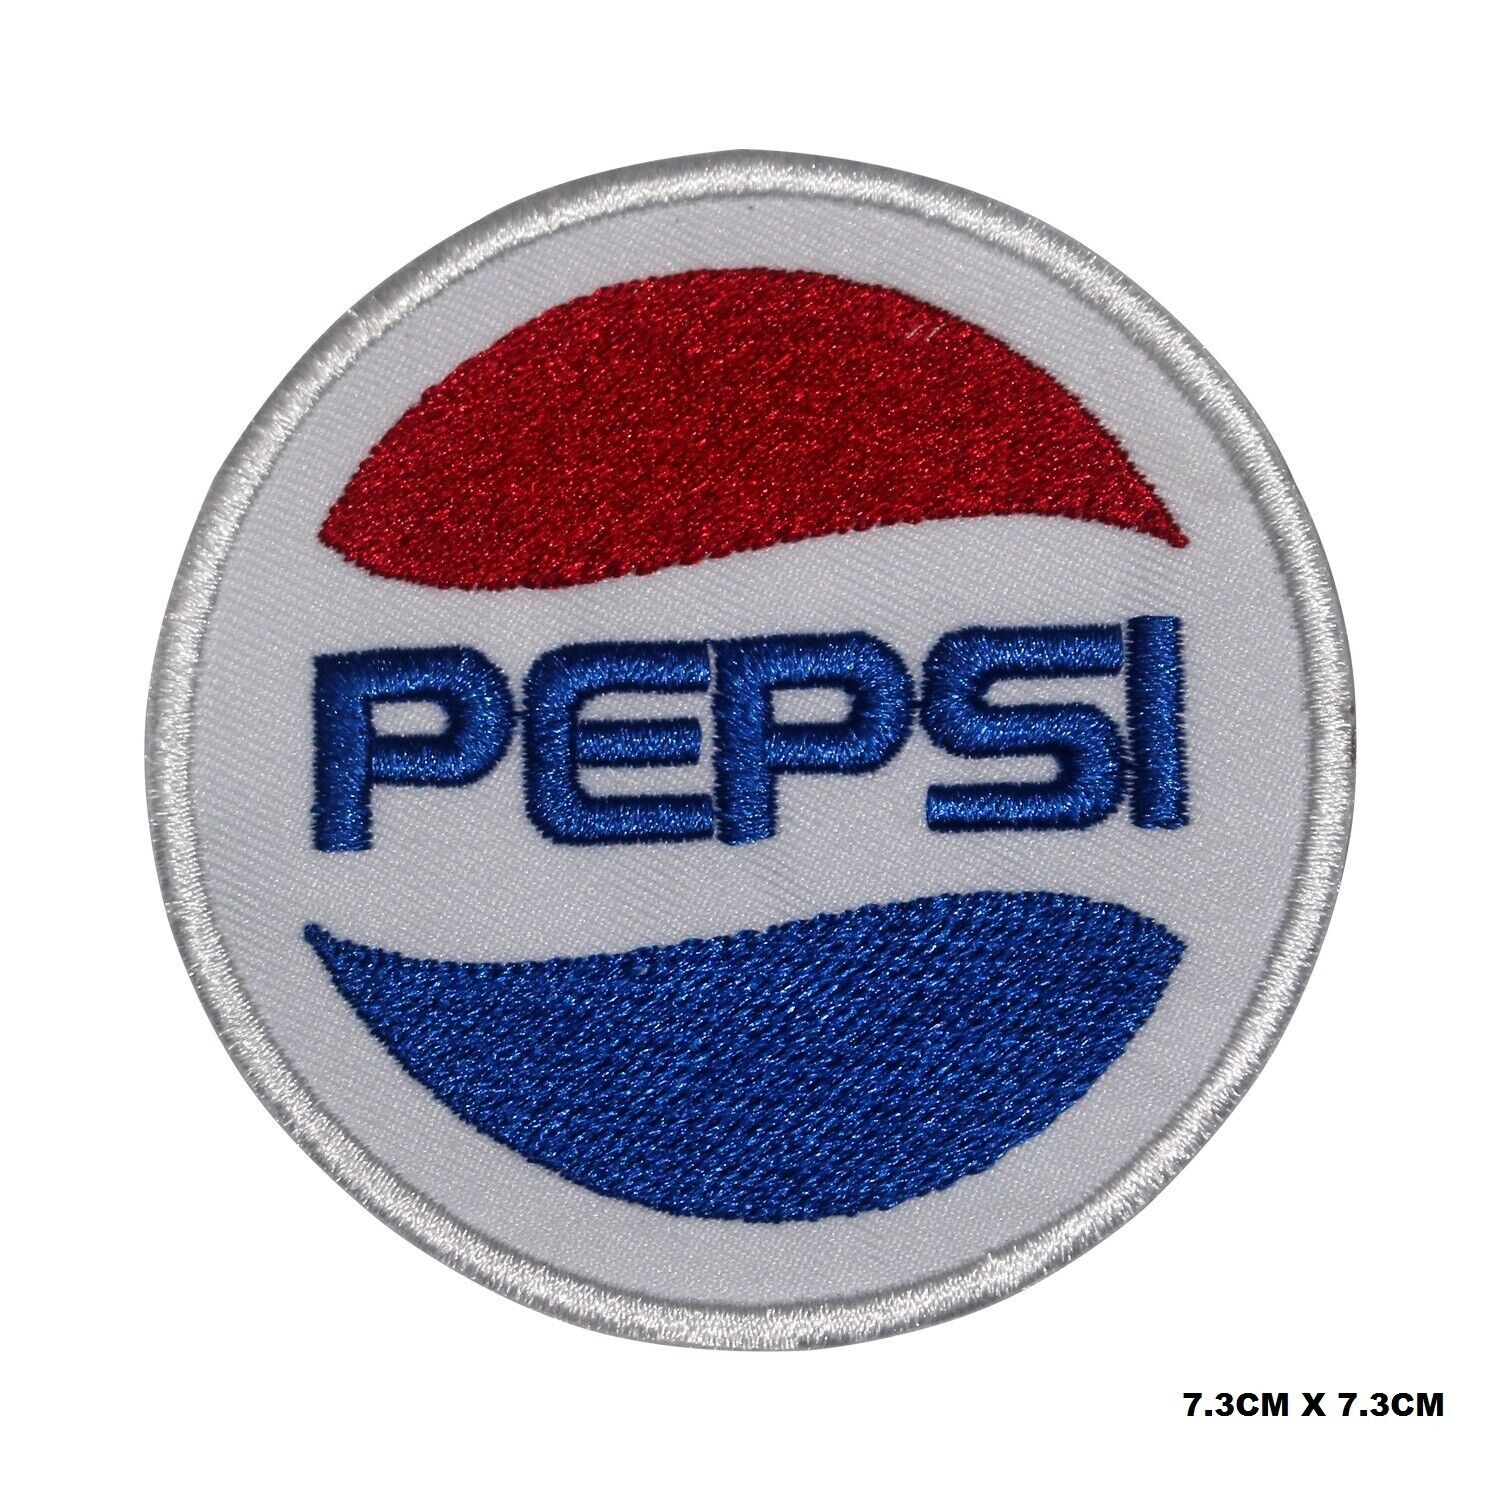 PEPSI Logo Embroidered Patch Iron On/Sew On Patch Batch For Clothes